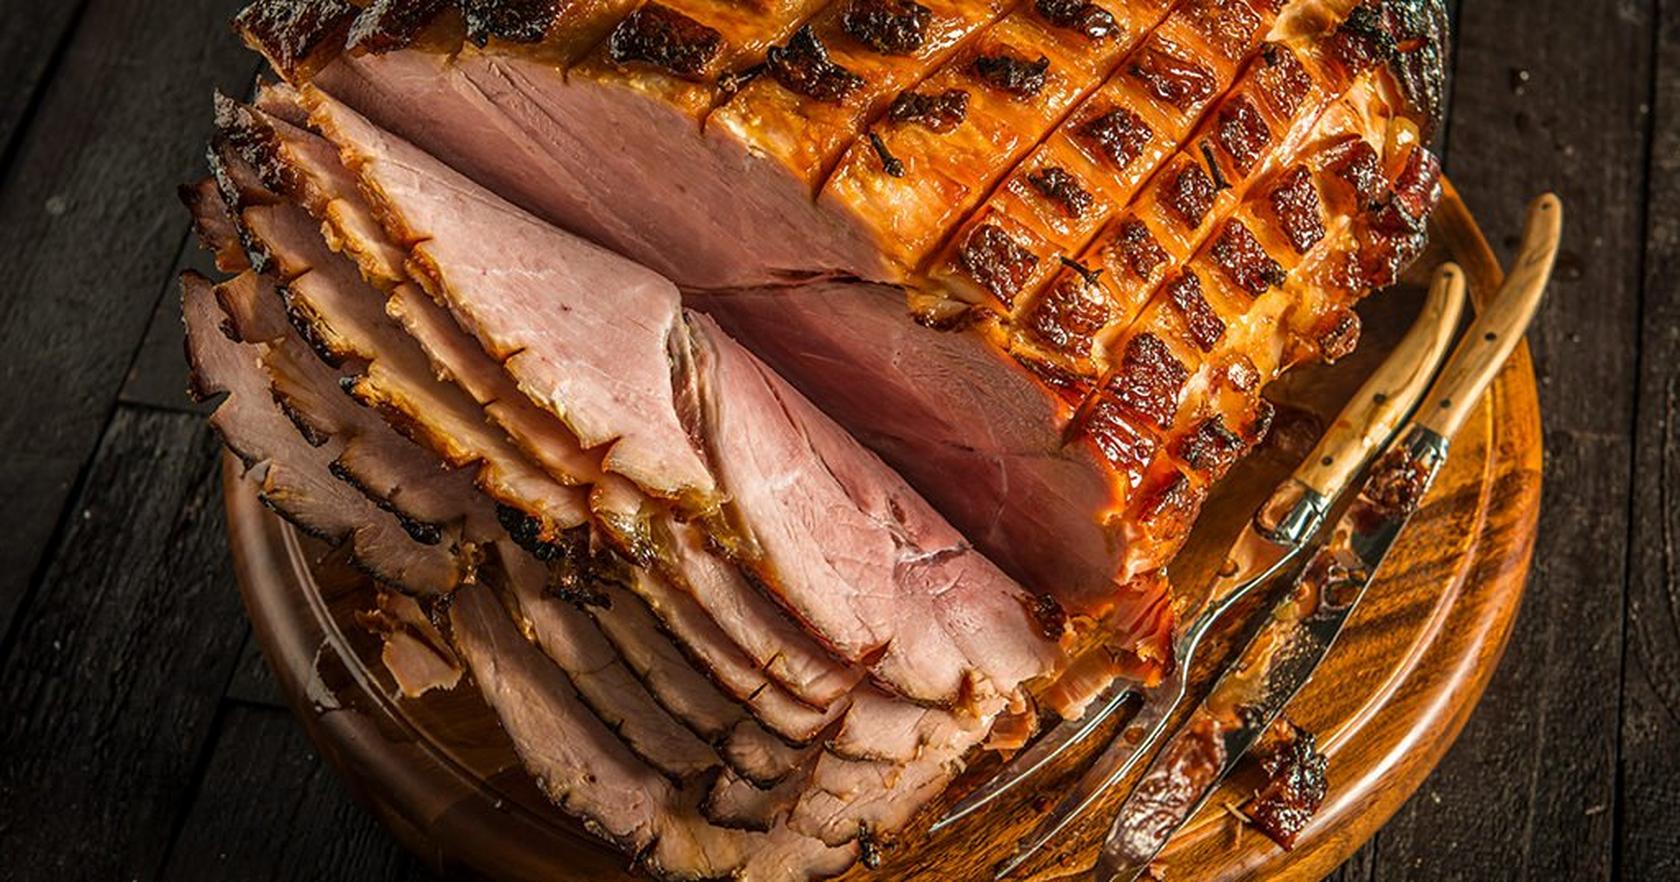 How to Cook a Ham: a Cook's Guide